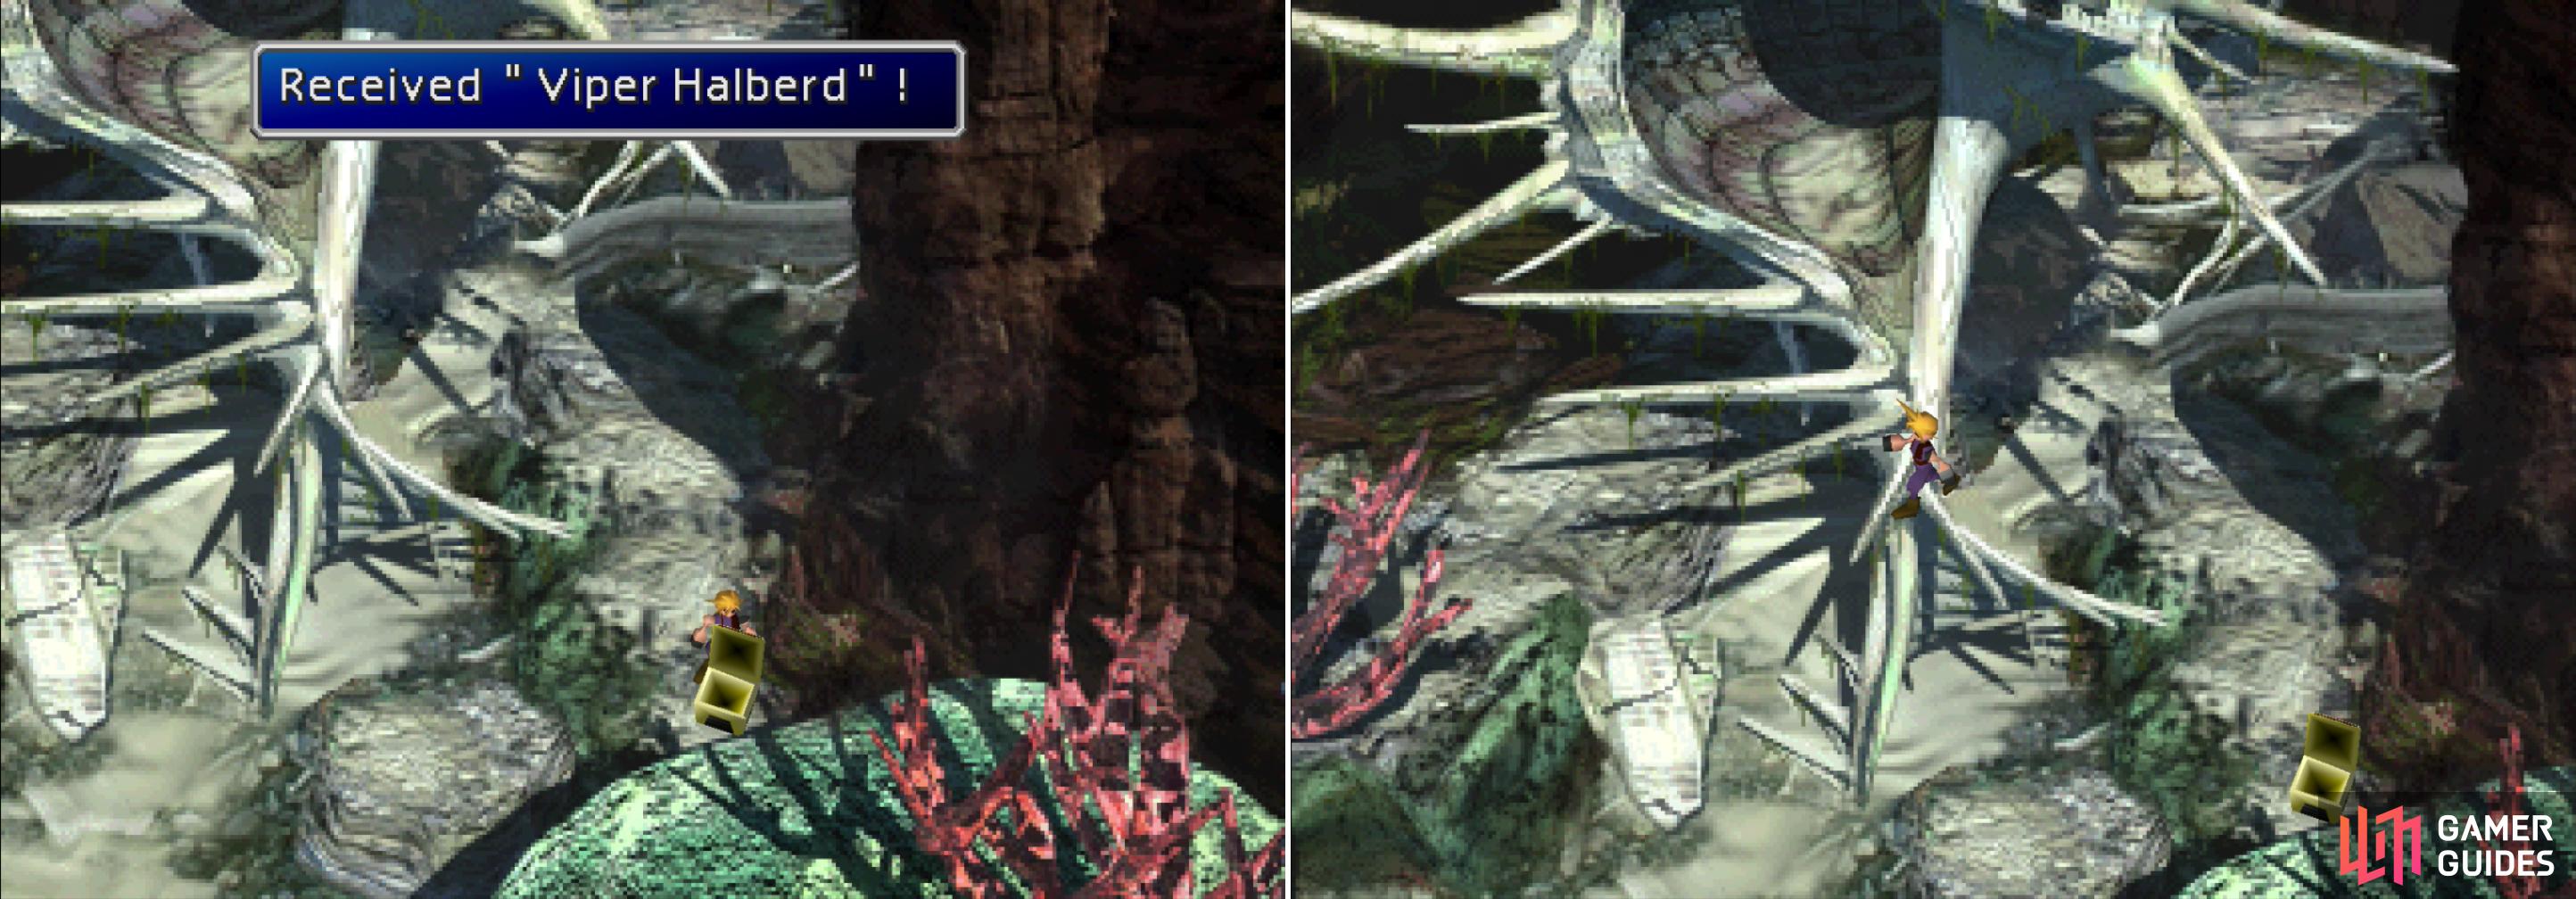 Run around the shell to find a chest containing a Viper Halberd (left) then leap up the shell’s spikes to reach the next area (right).